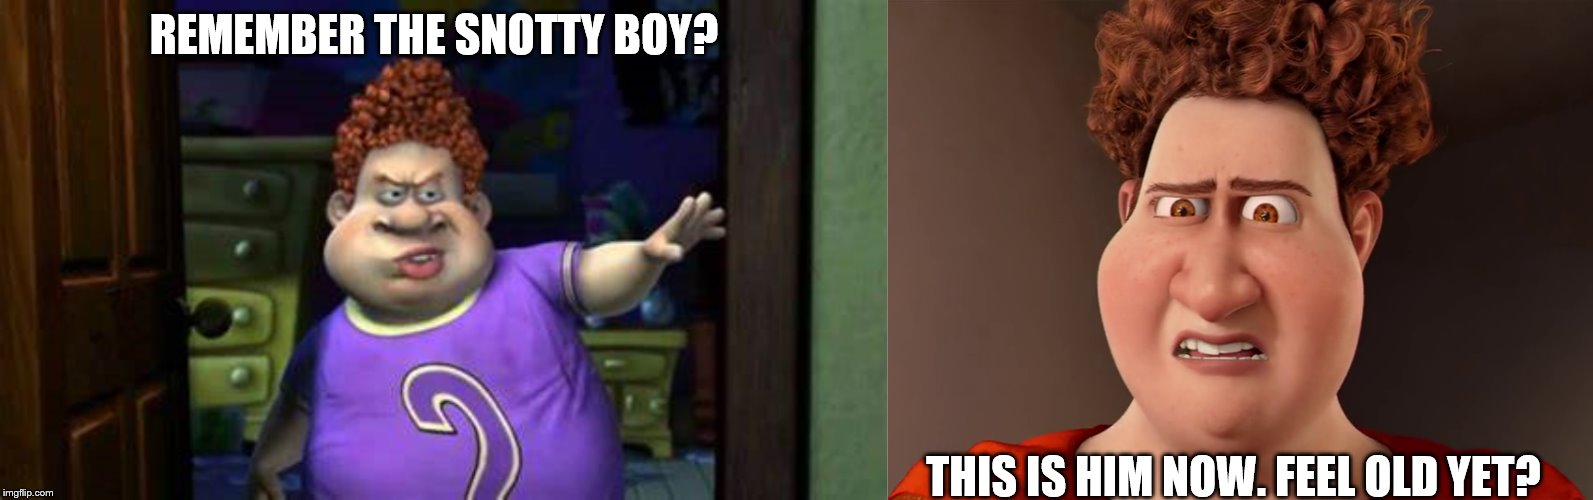 Snotty Boy is a younger Hal change my mind | REMEMBER THE SNOTTY BOY? THIS IS HIM NOW. FEEL OLD YET? | image tagged in barnyard,snotty boy,hal,megamind | made w/ Imgflip meme maker